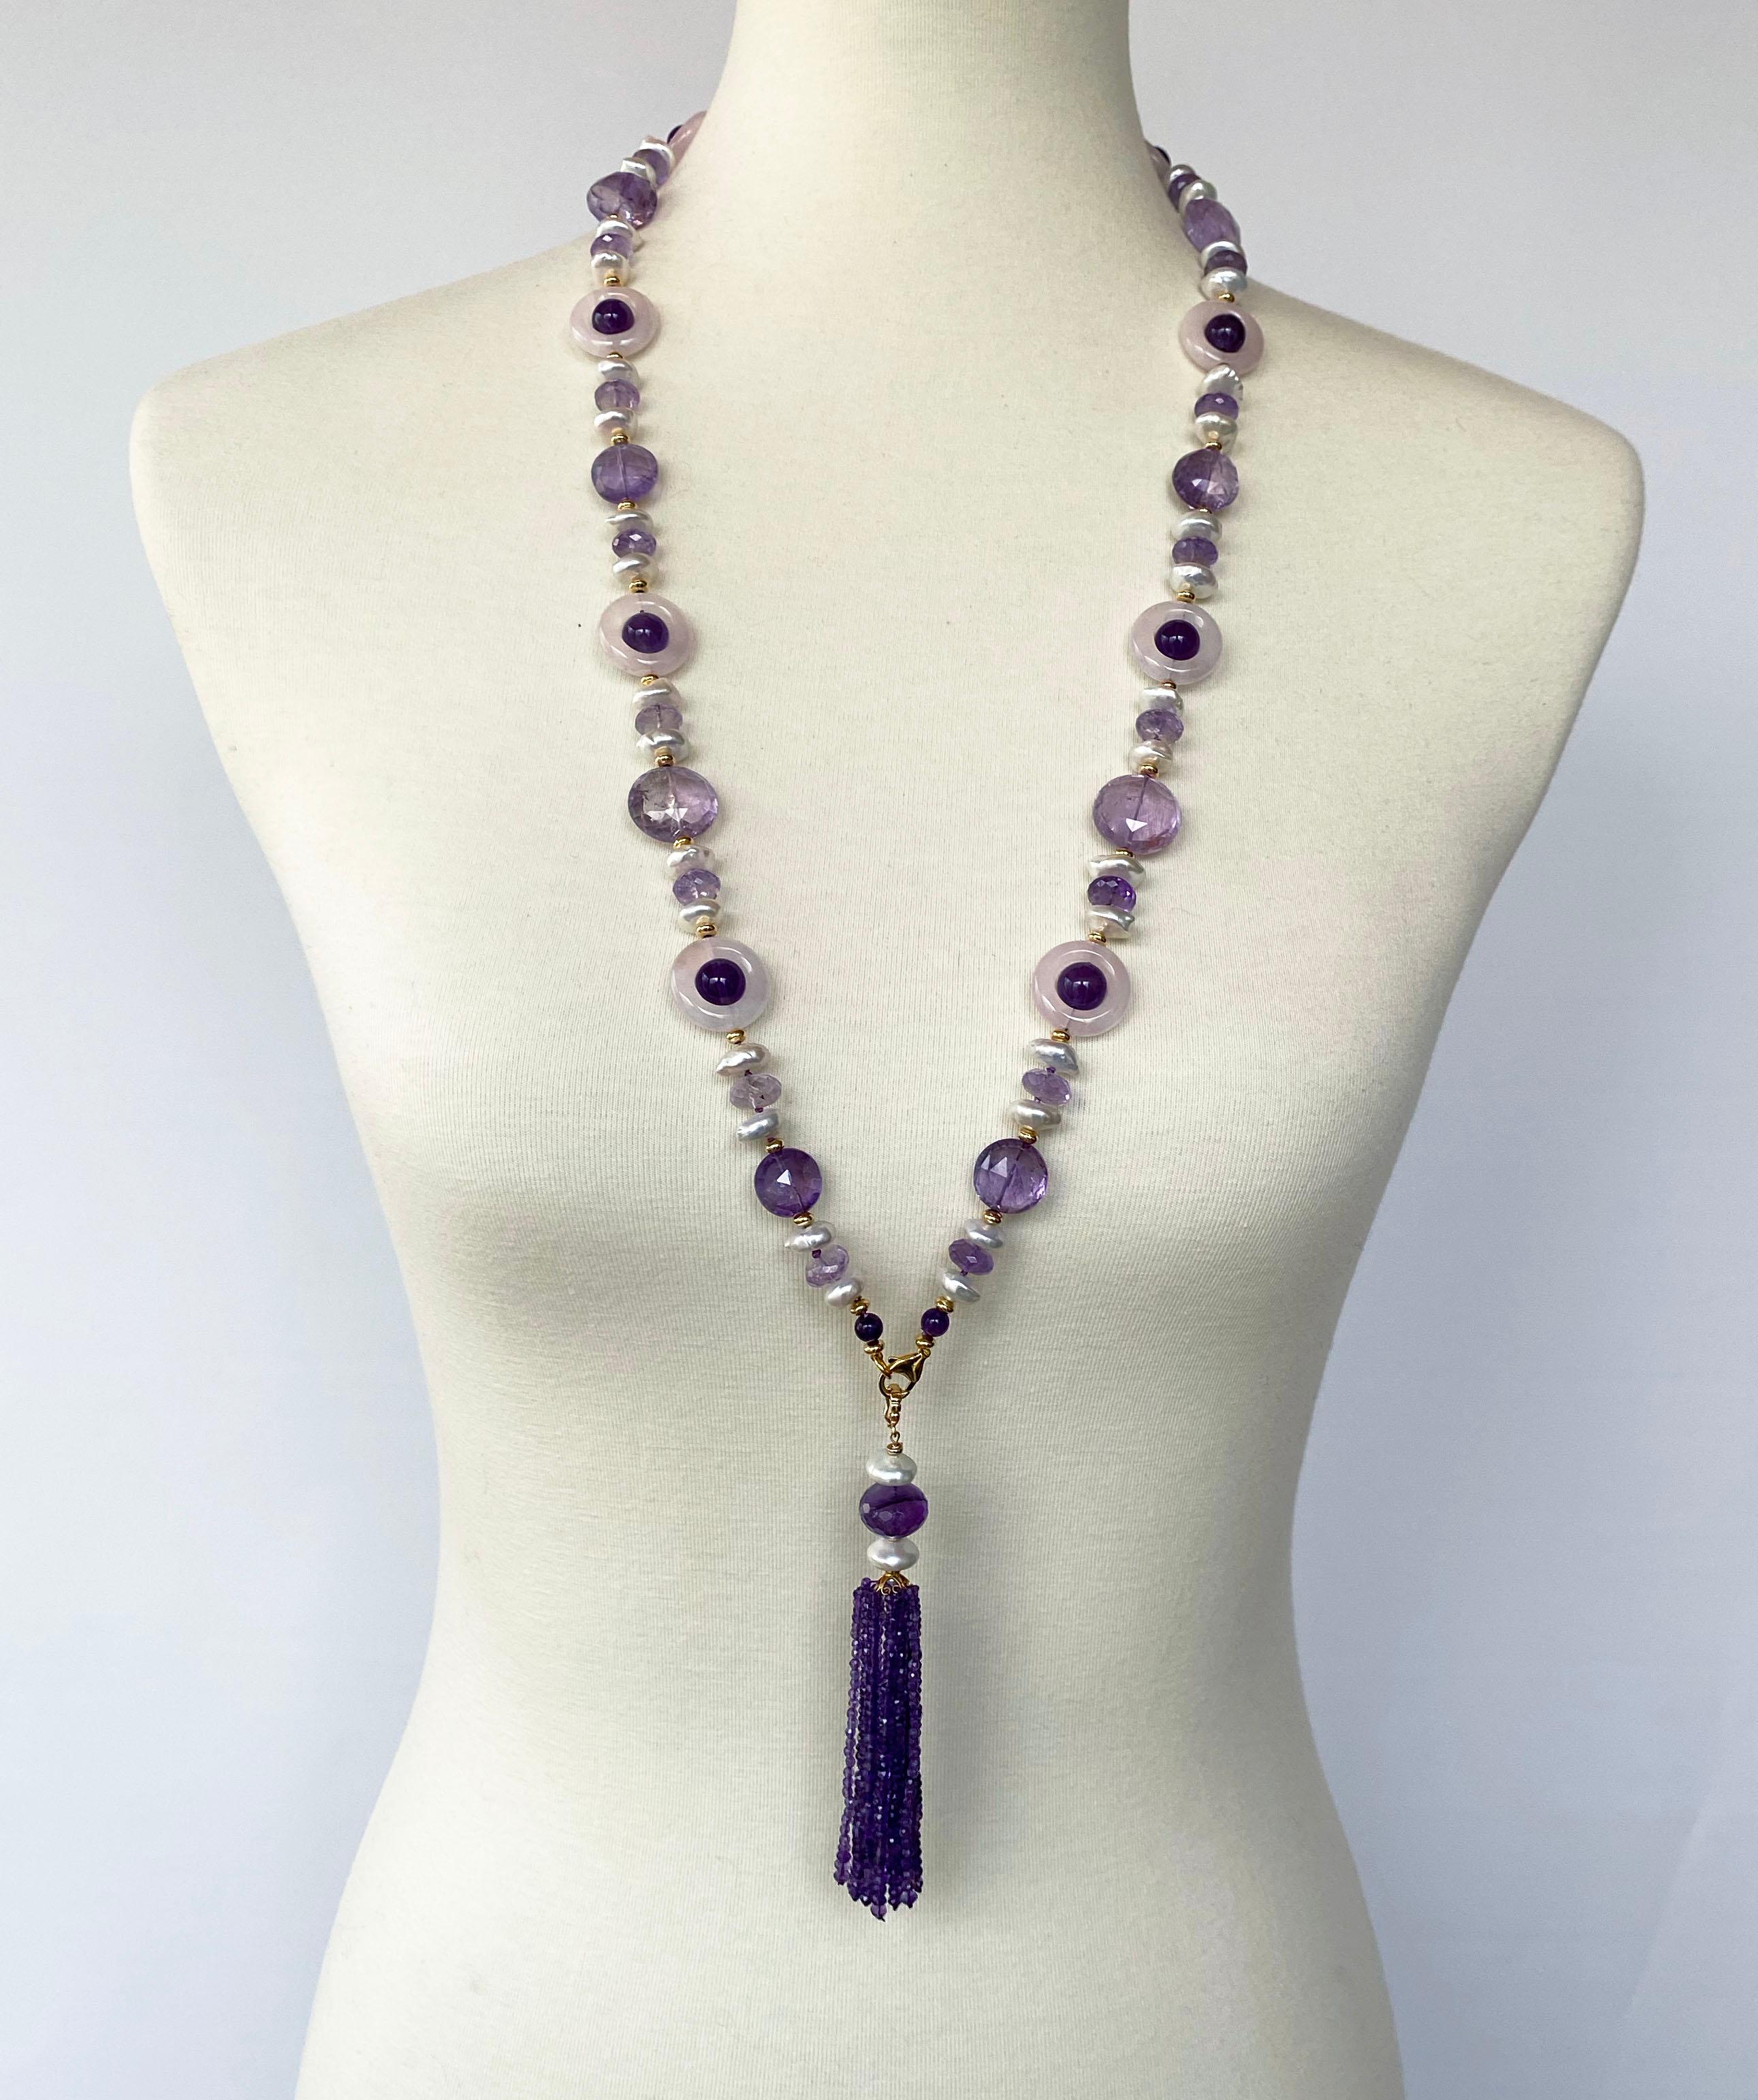 Vibrant and colorful Sautoir hand made by Marina J. This lovely multi shaped and colored jewel piece features  stunning two tone Amethyst, Rose Quartz and very high luster white Pearls that display a wild iridescent sheen, all perfectly accented by